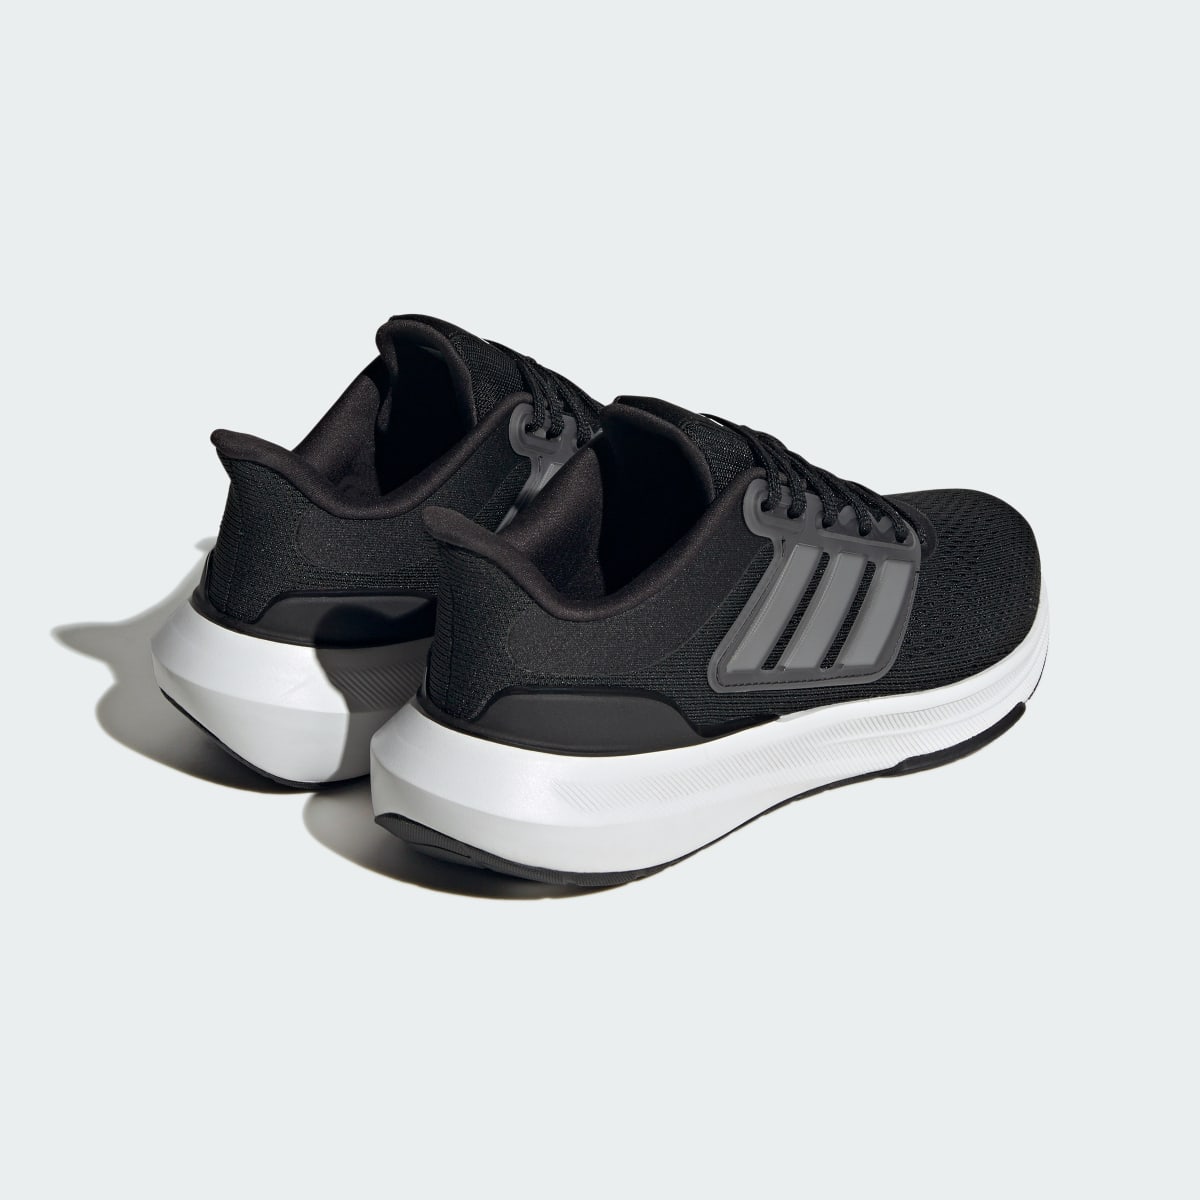 Adidas Chaussure Ultrabounce Chaussant large. 6